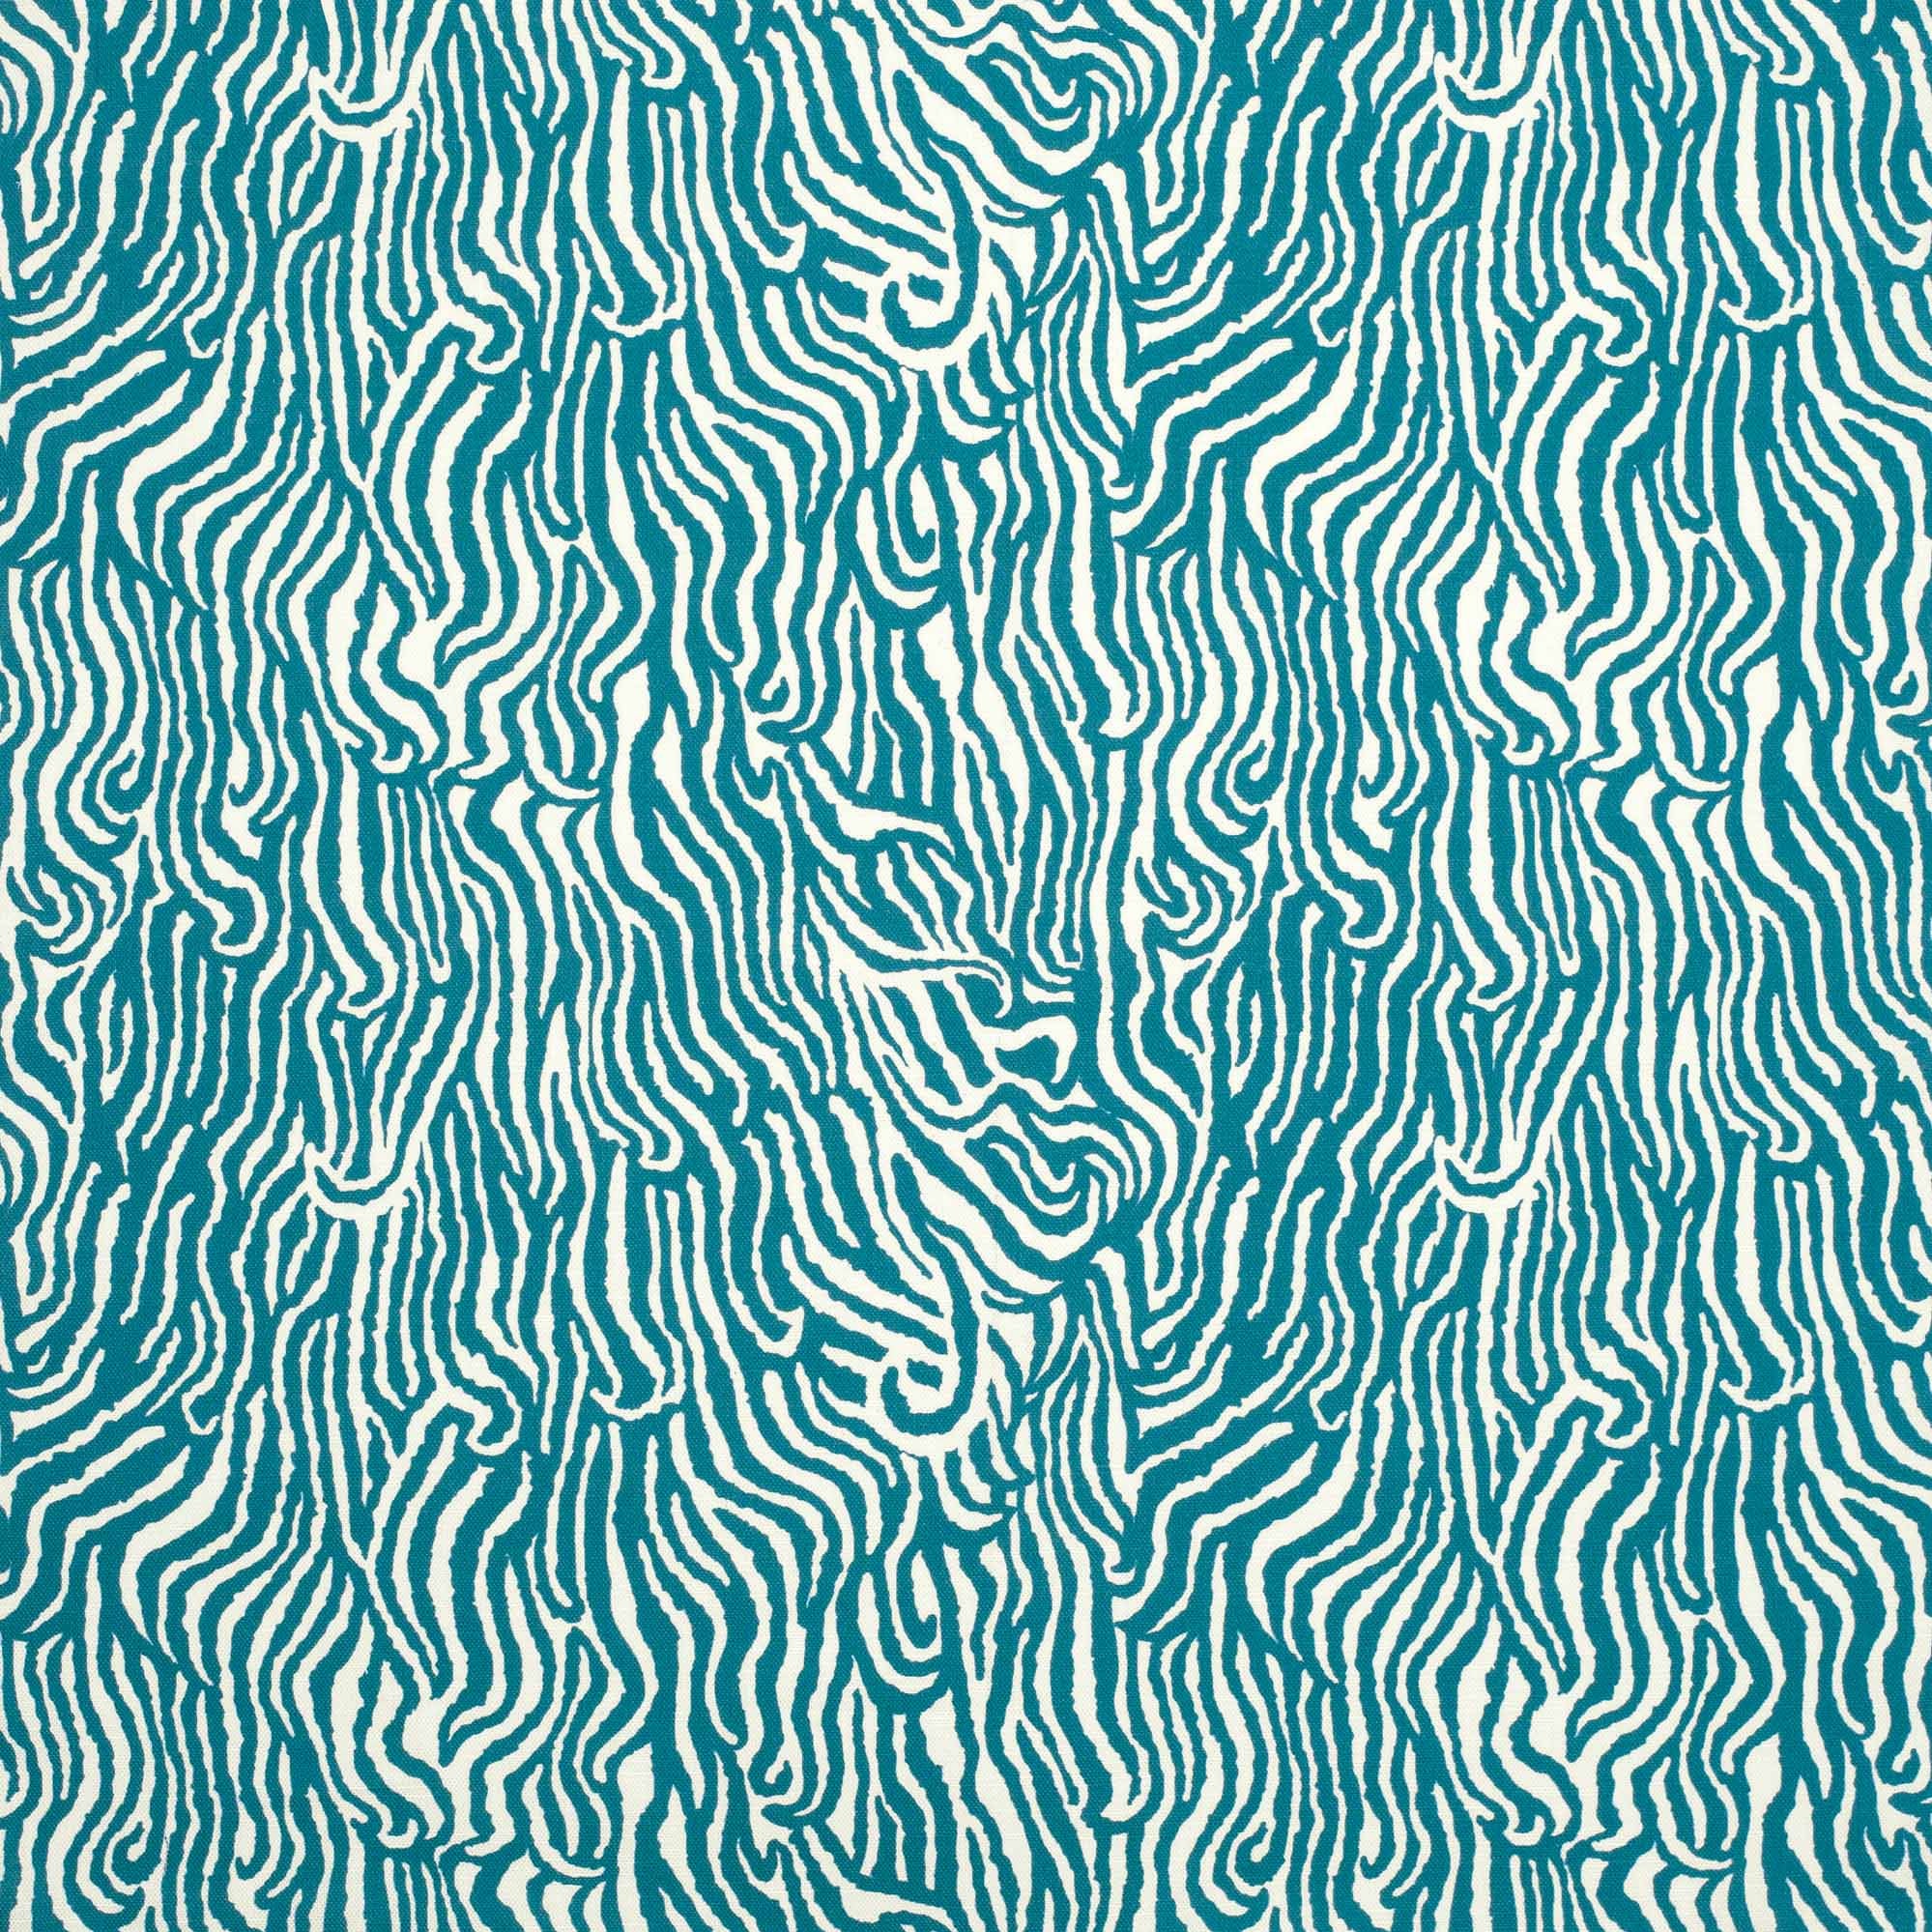 Detail of fabric in a playful animal print in turquoise on a white field.